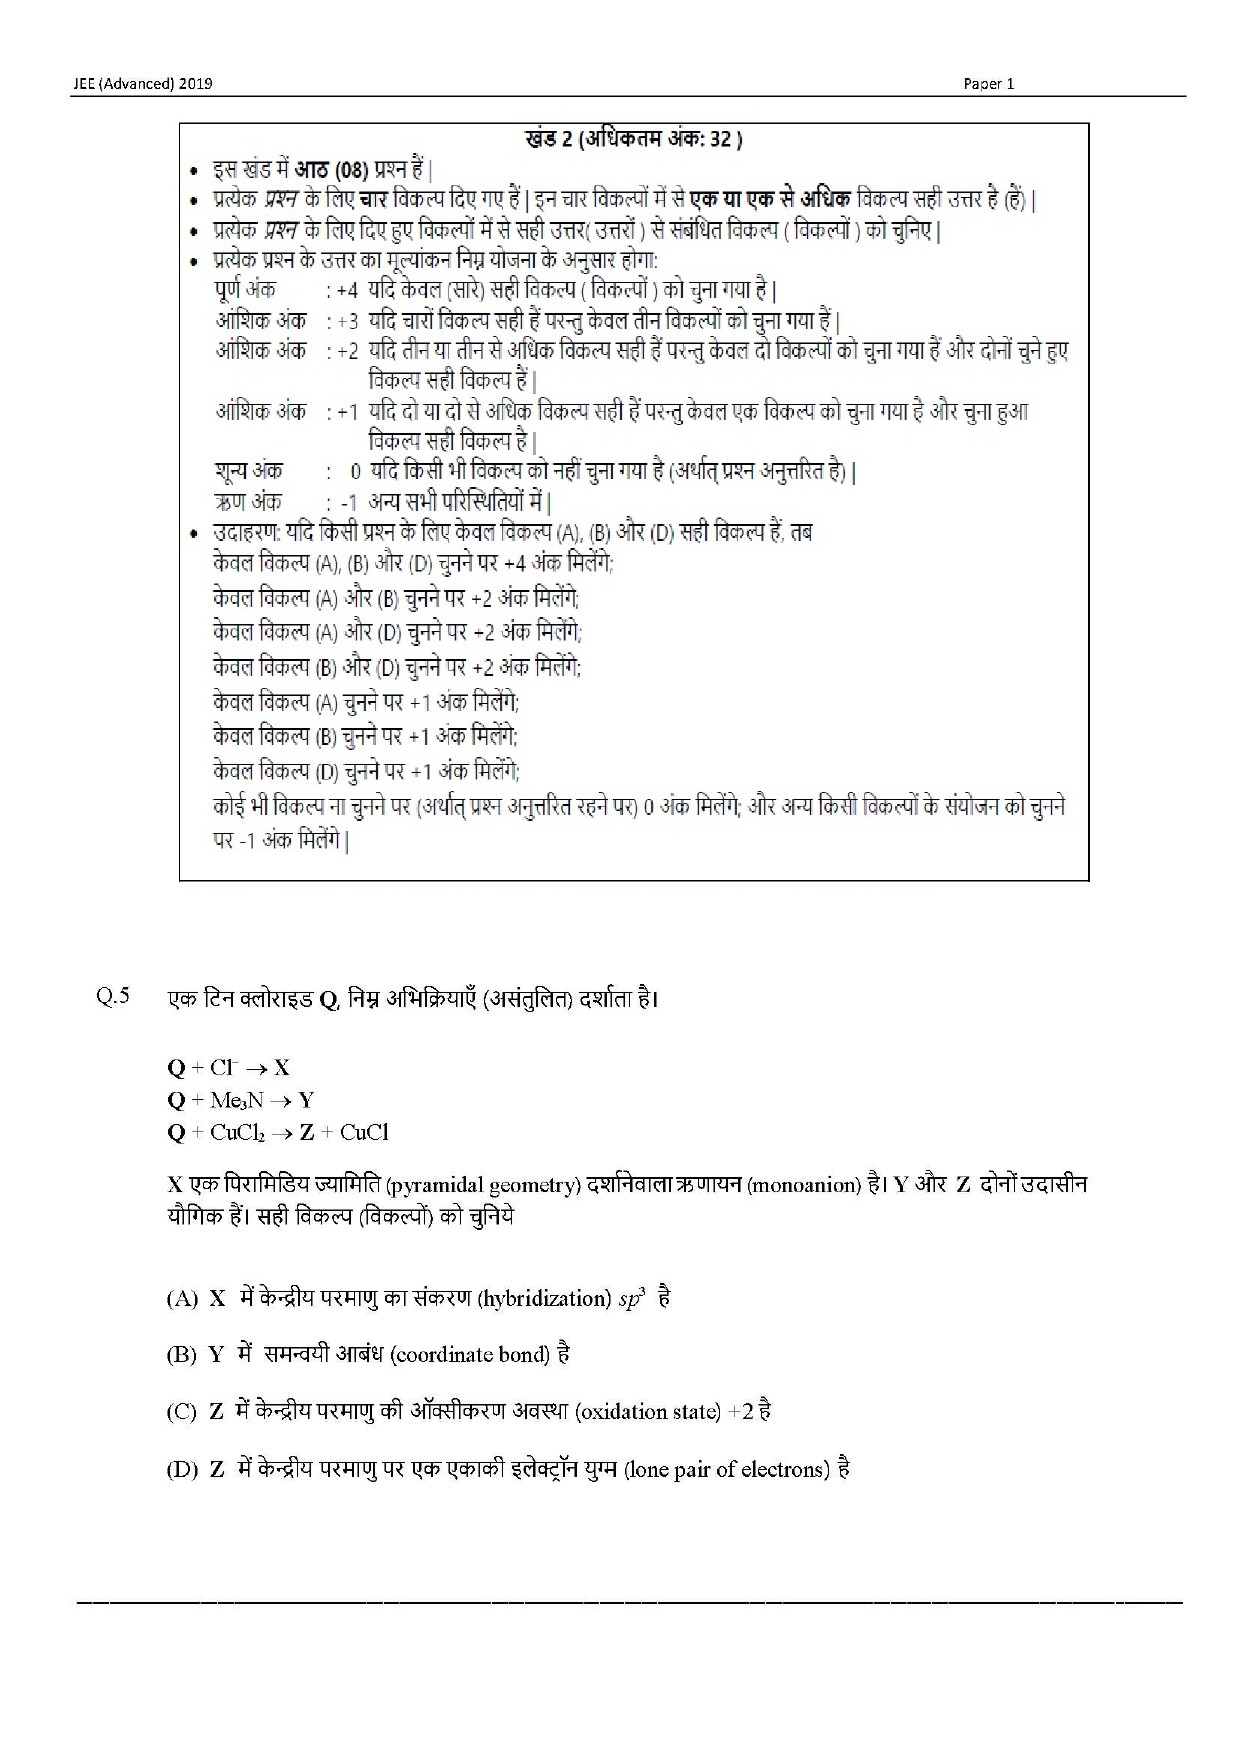 JEE Advanced Hindi Question Paper 2019 Paper 1 Chemistry 3